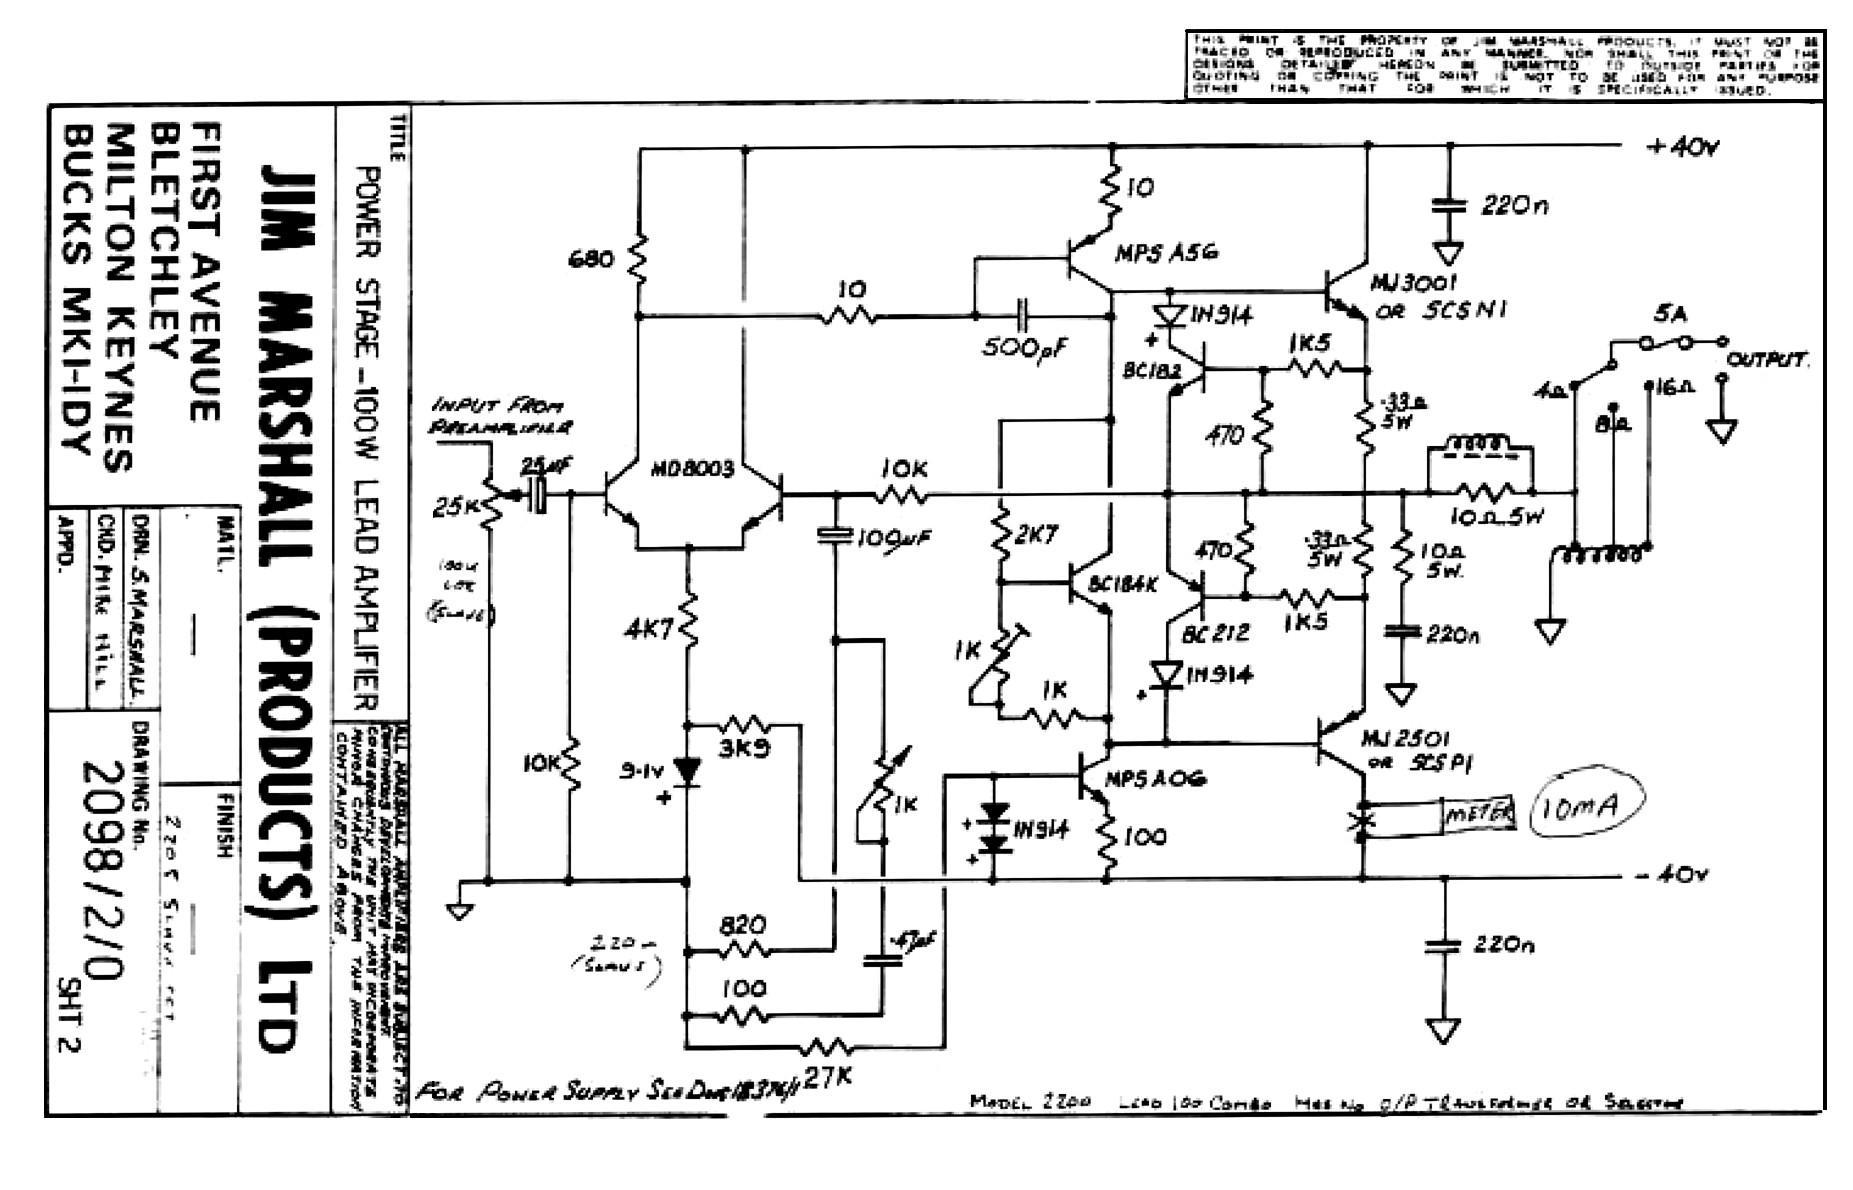 2000w Power Amplifier Circuit Diagram With Pcb Layout ...